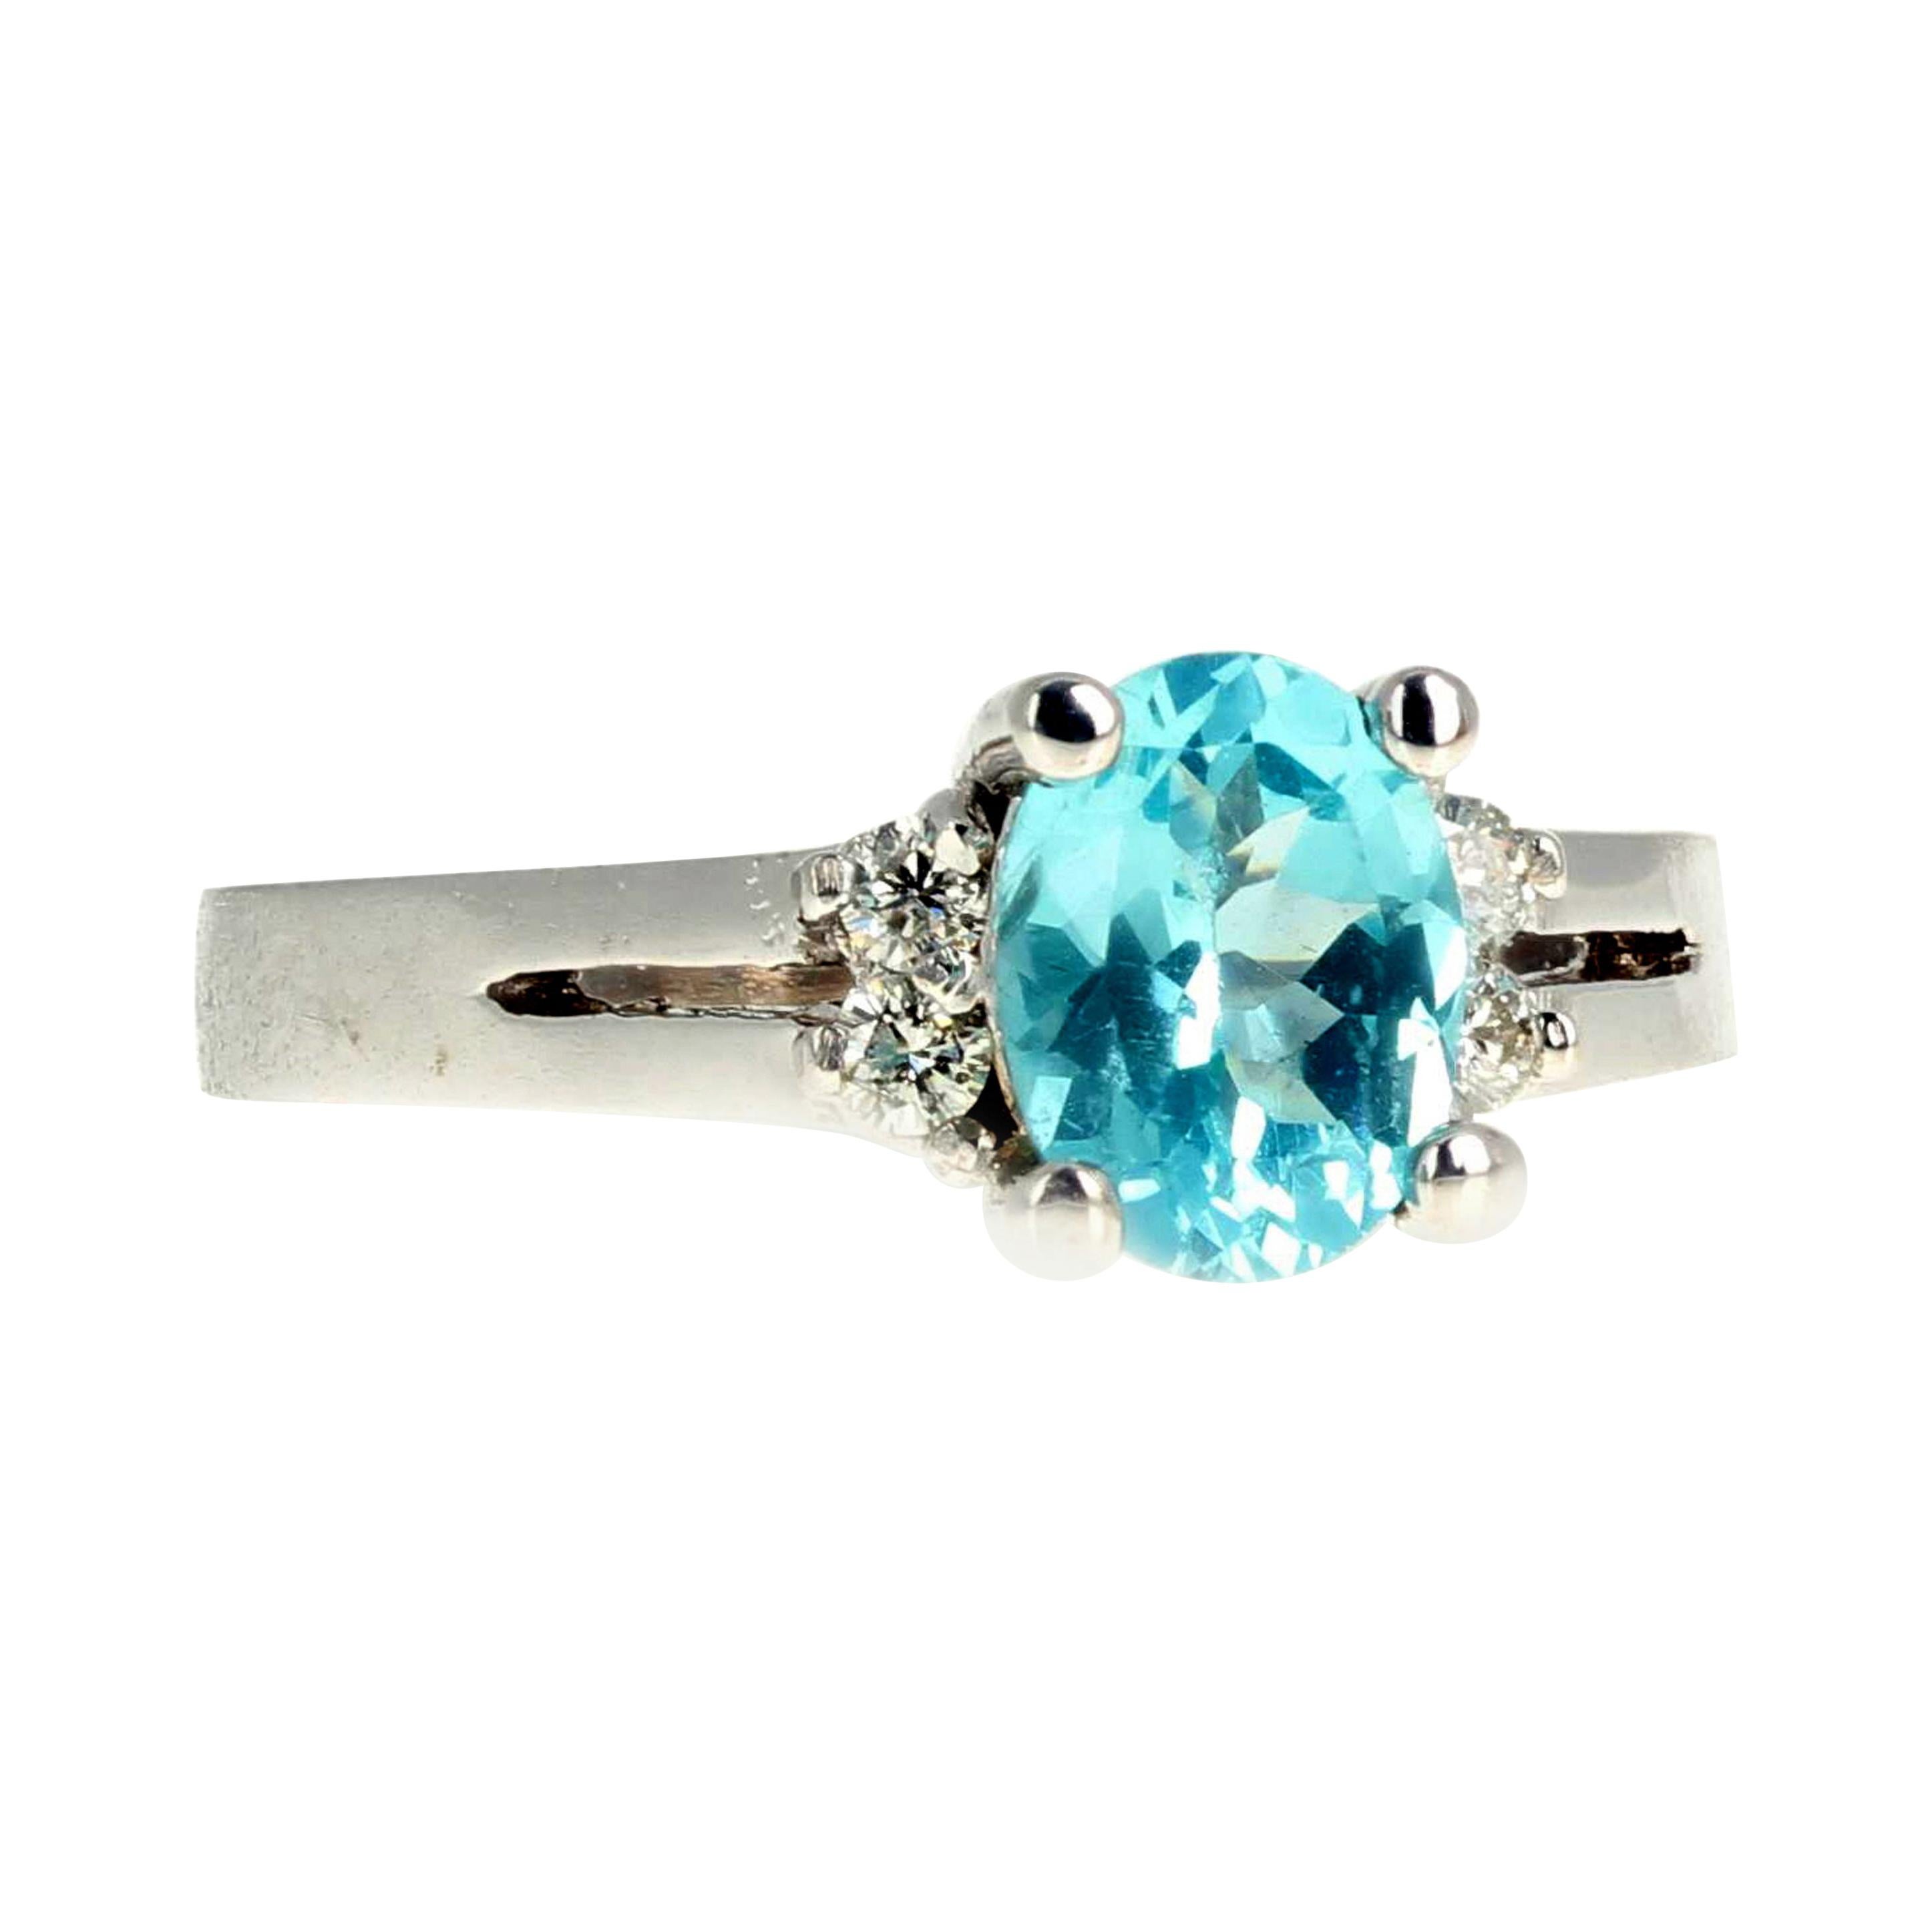 This beautiful brilliantly bright natural blue 1.26 carat Apatite (8 mm x 6 mm) is enhanced with 0.15 carats of natural glittering white Diamonds set in this 14K white gold ring size 7 (sizable for free).  